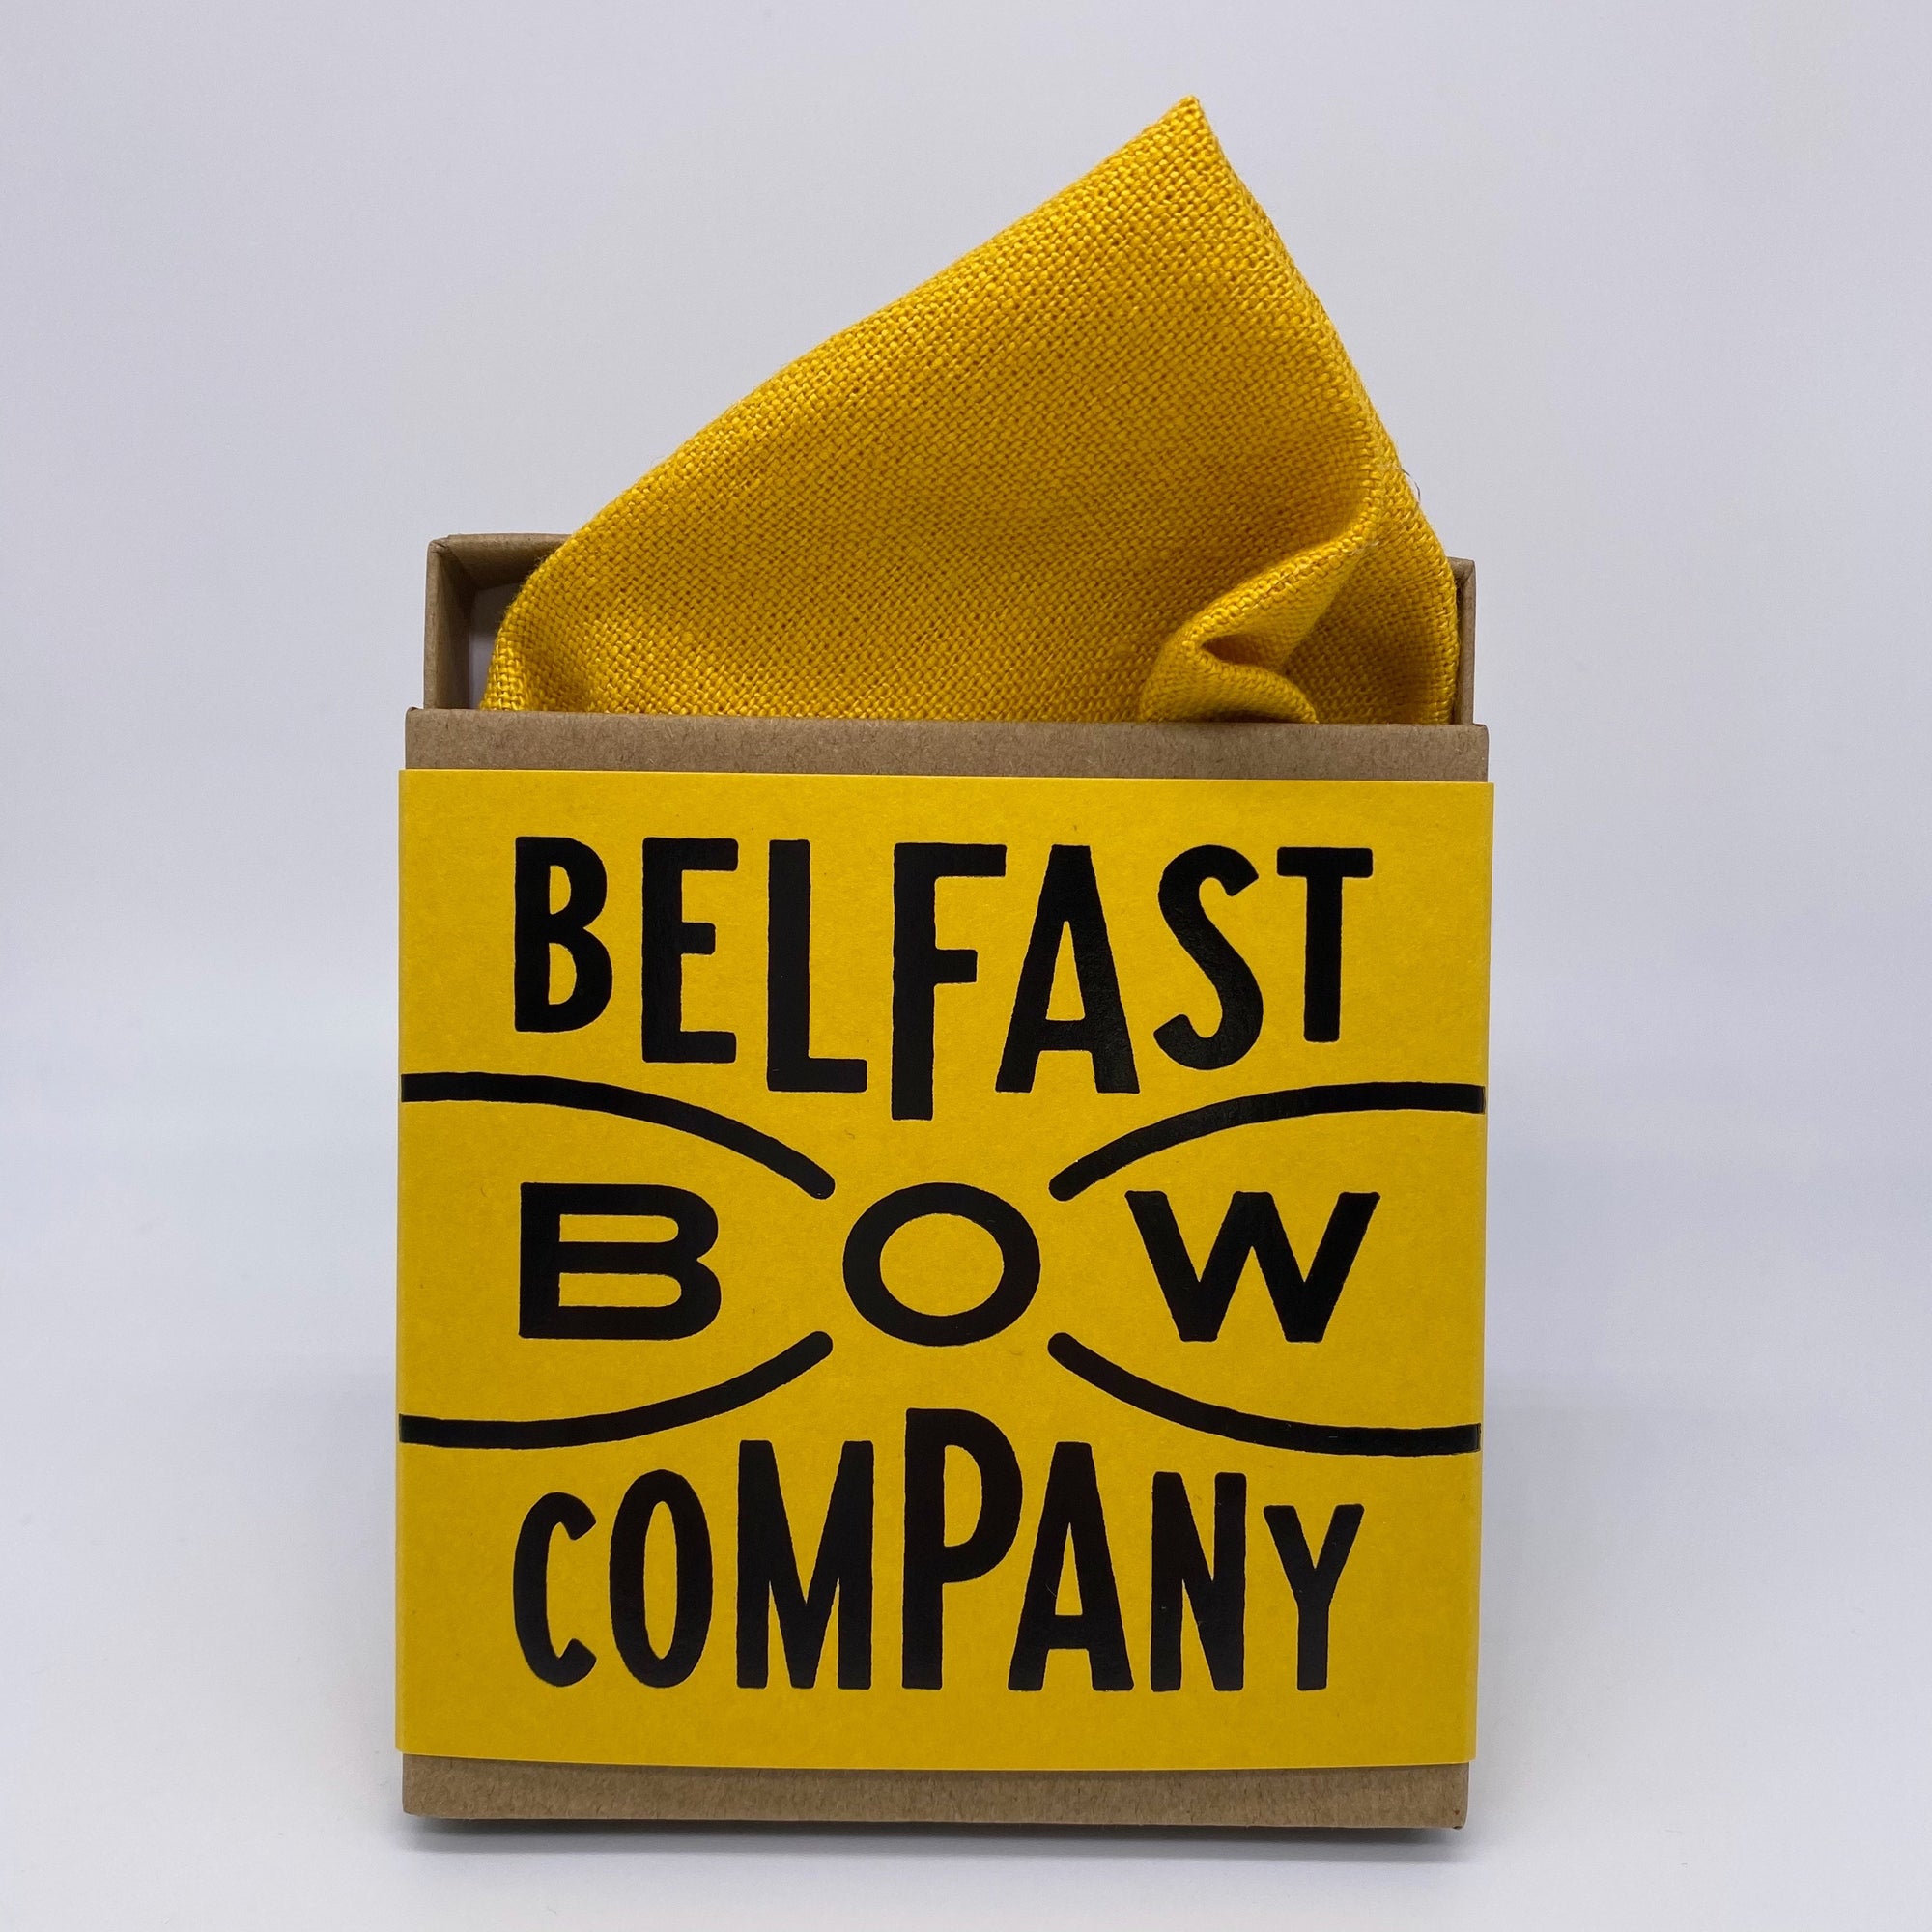 Irish Linen Pocket Square in Harland and Wolff Yellow by the Belfast Bow Company